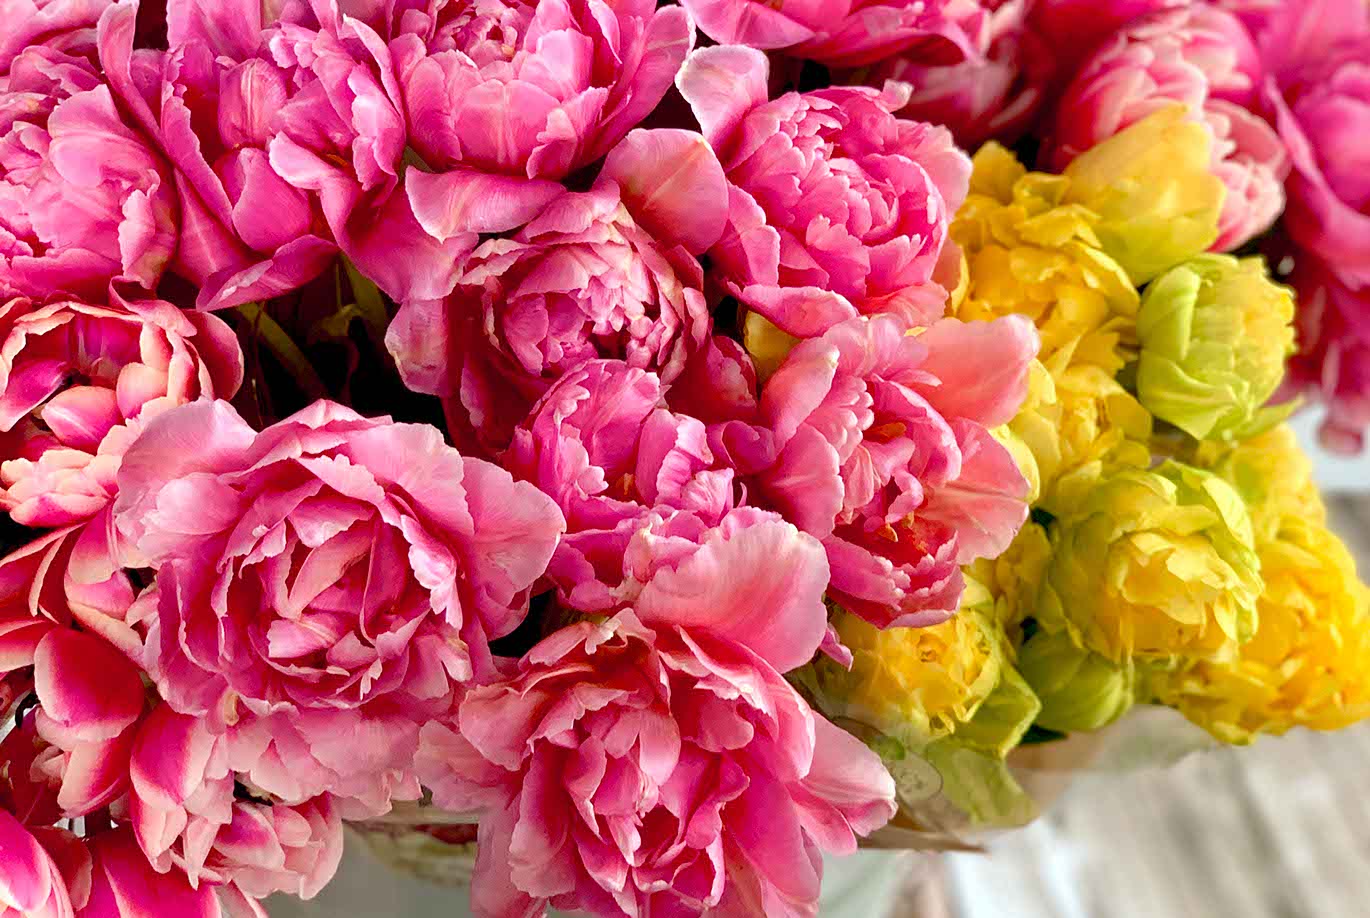 A bucket filled with several bunches of bright pink, red, & yellow Trader Joe's Peony Tulips.